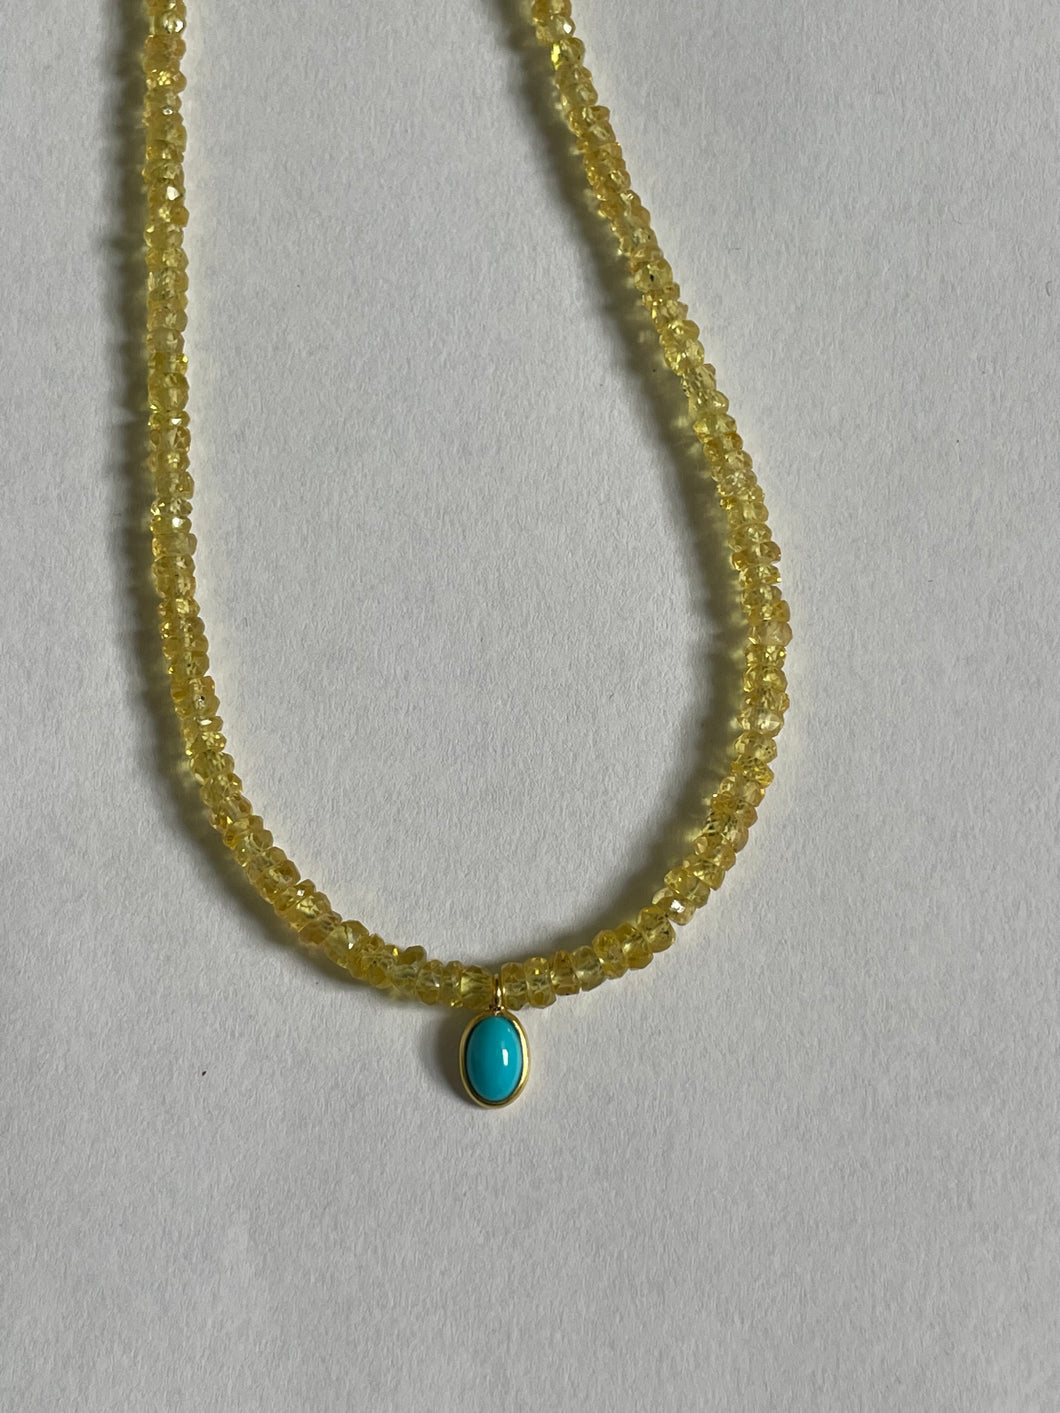 Yellow Sapphire Beaded Necklace with Turquoise Drop - 19